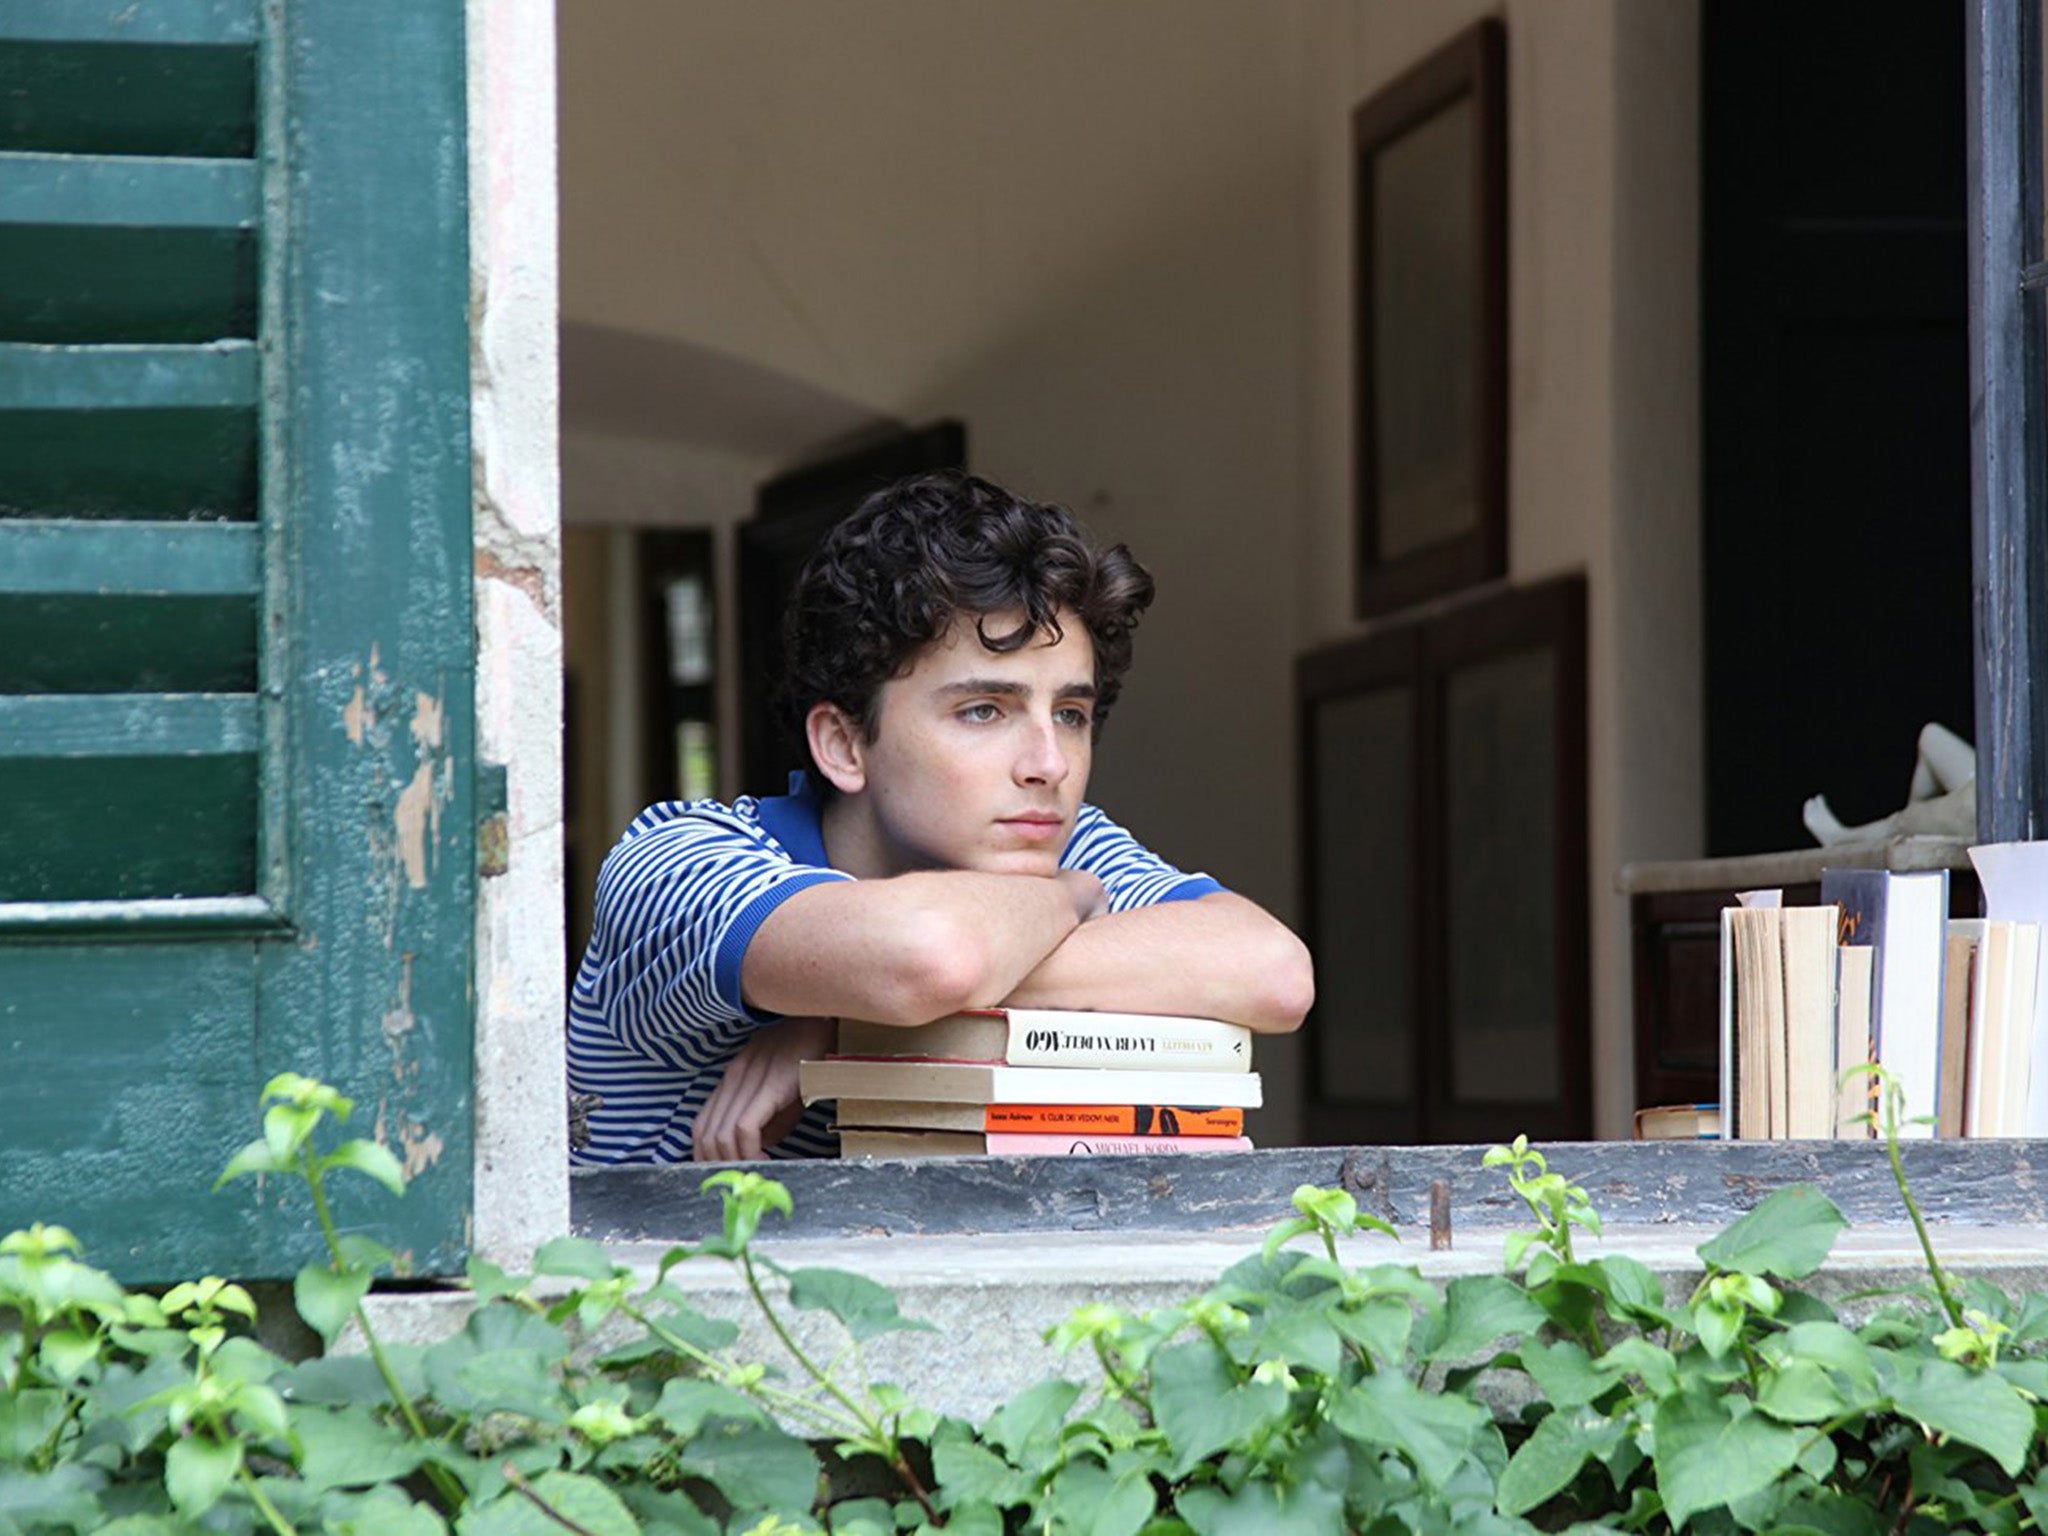 Timothée Chalamet as Elio in ‘Call Me by Your Name’